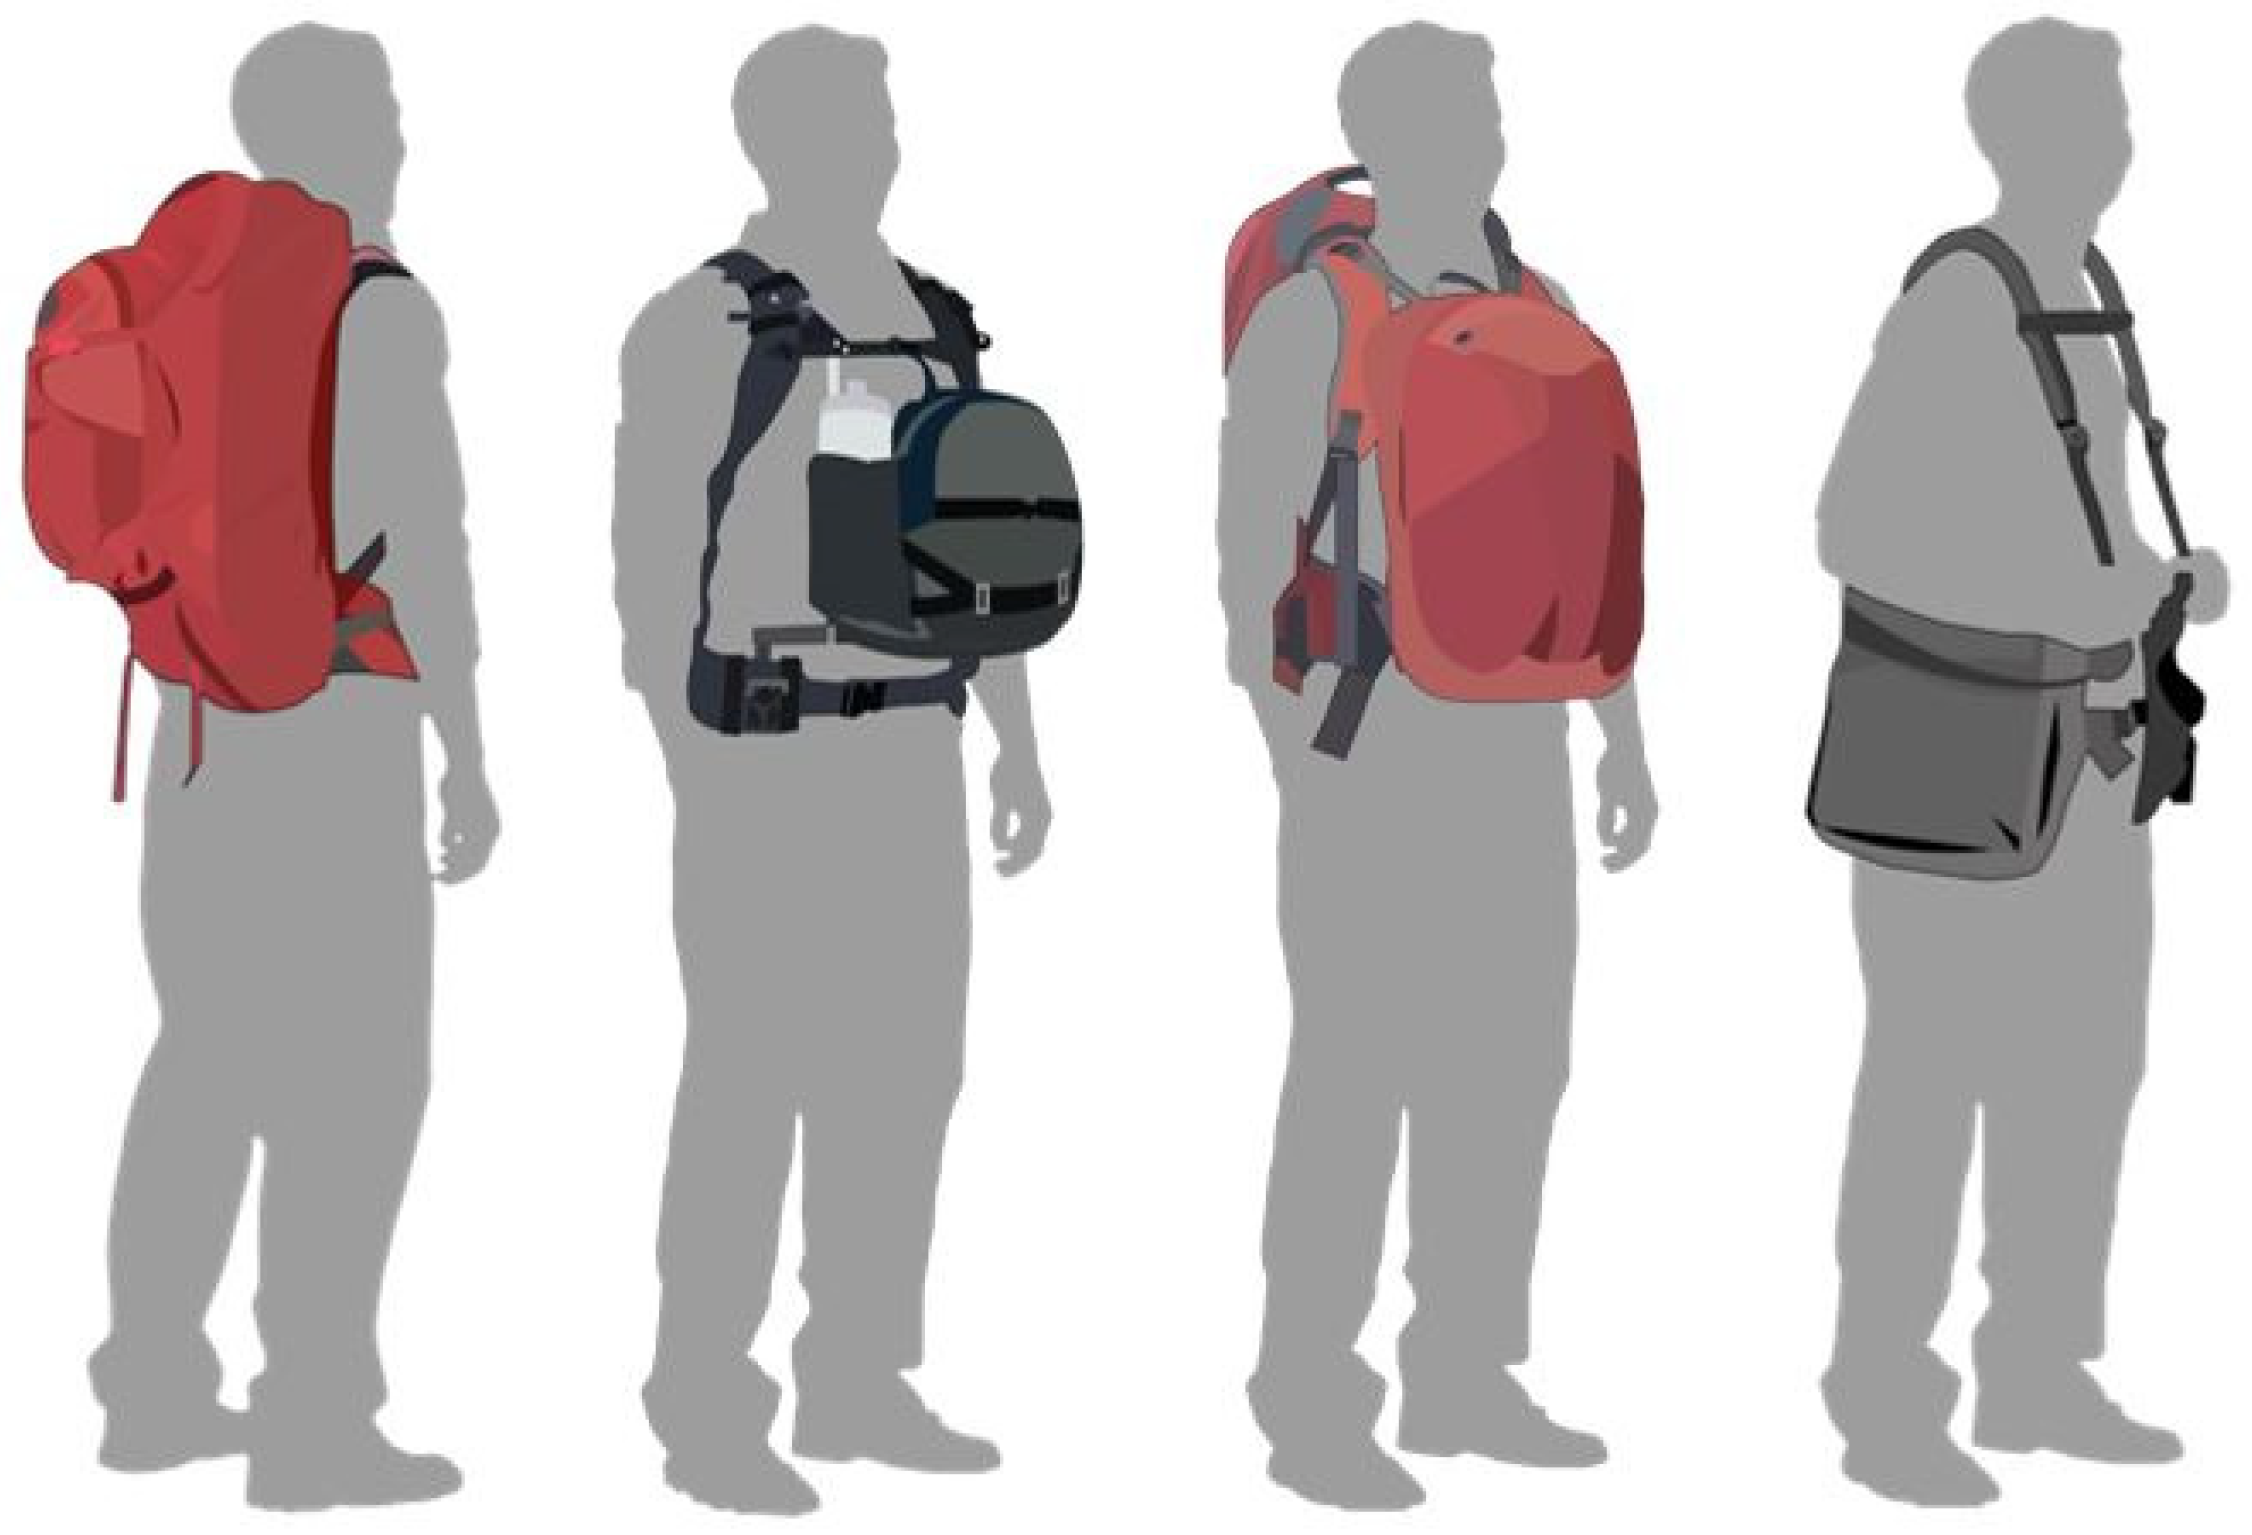 IJERPH | Free Full-Text | Impact of Backpacks on Ergonomics: Biomechanical  and Physiological Effects: A Narrative Review